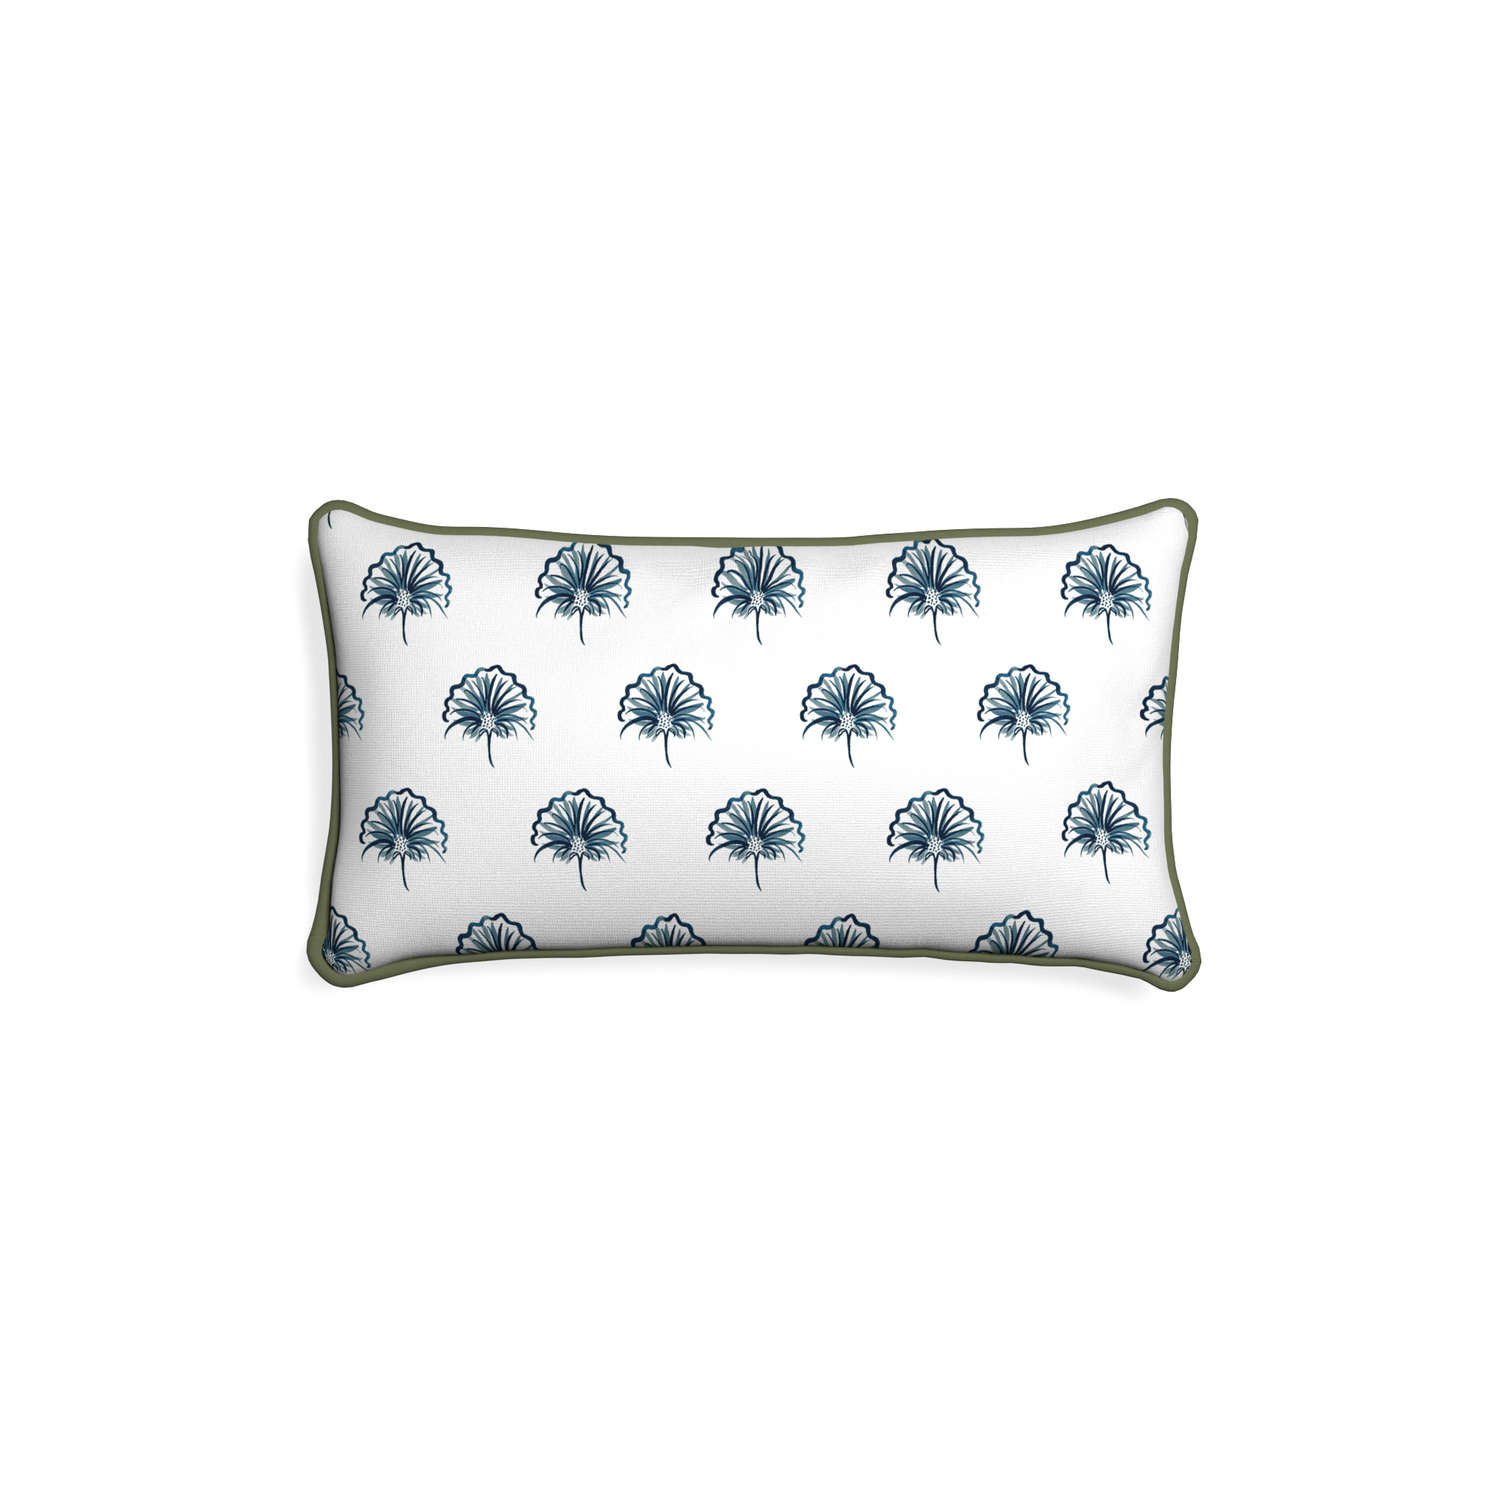 Petite-lumbar penelope midnight custom floral navypillow with f piping on white background